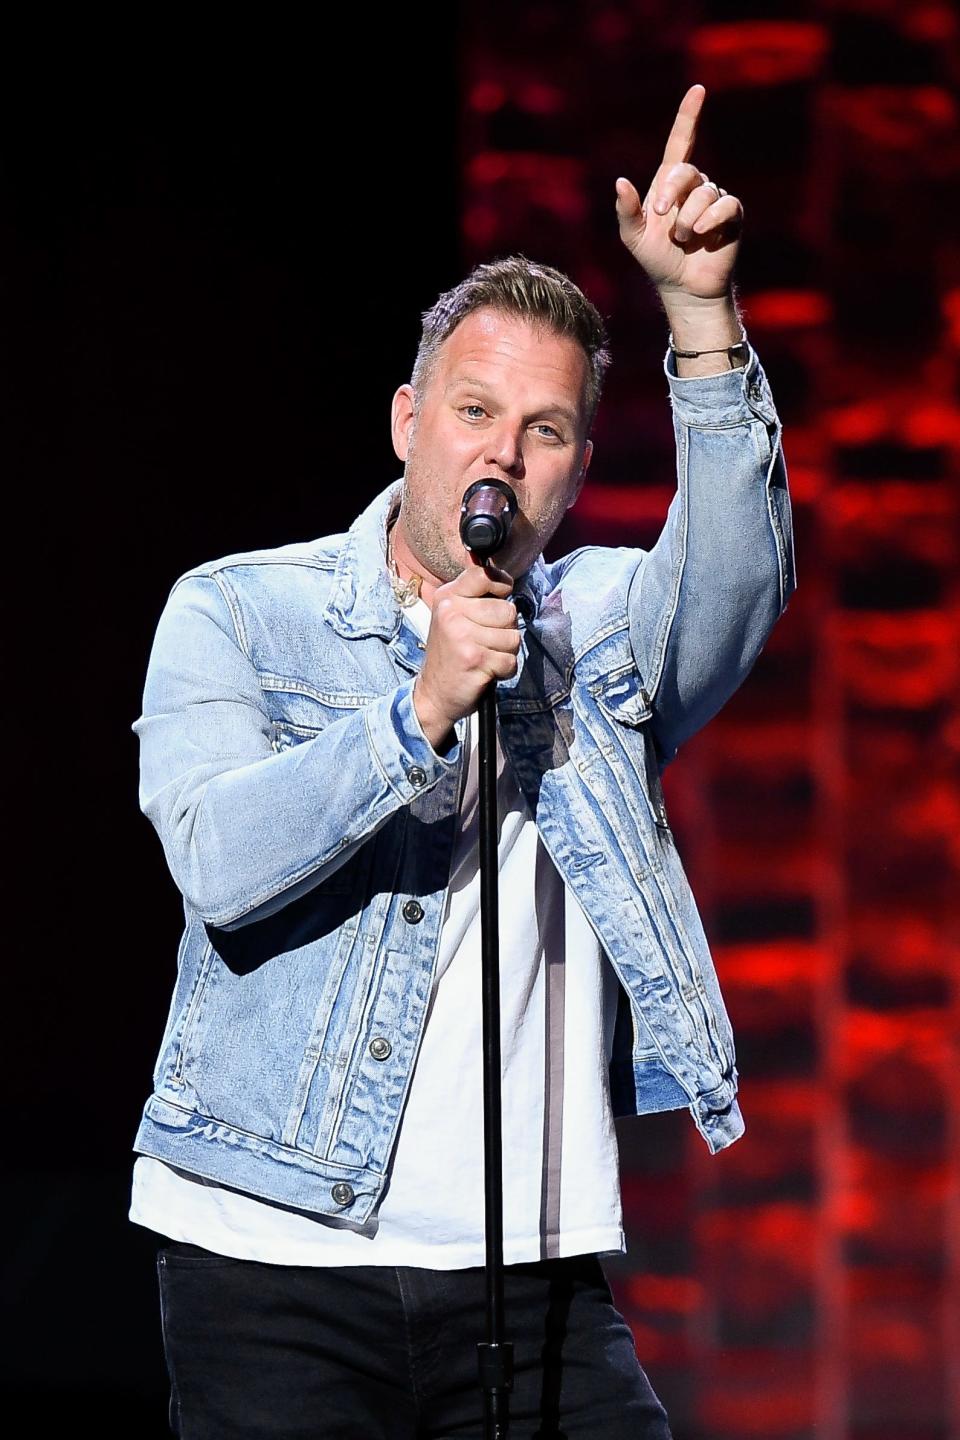 Contemporary Christian music star Matthew West will perform Sunday at Hiland Park Baptist Church. “Music is a powerful thing, and combining that with hope is an important message in our world right now,” he said.